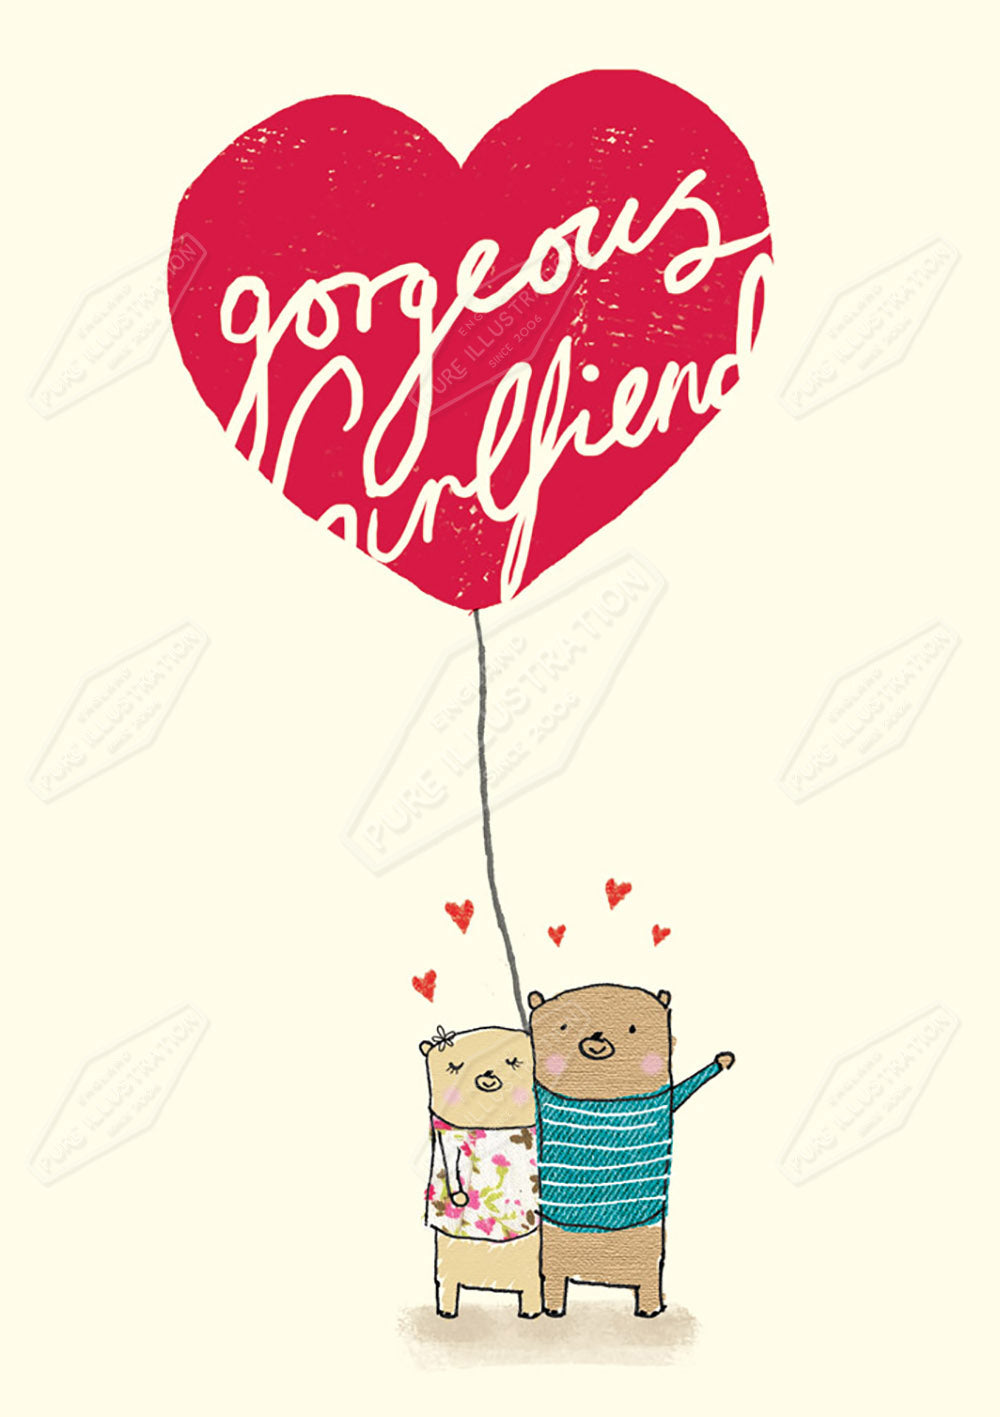 Birthday / Valentines Greeting Card Design by Cory Reid for Pure Art Licensing Agency & Surface Design Studio